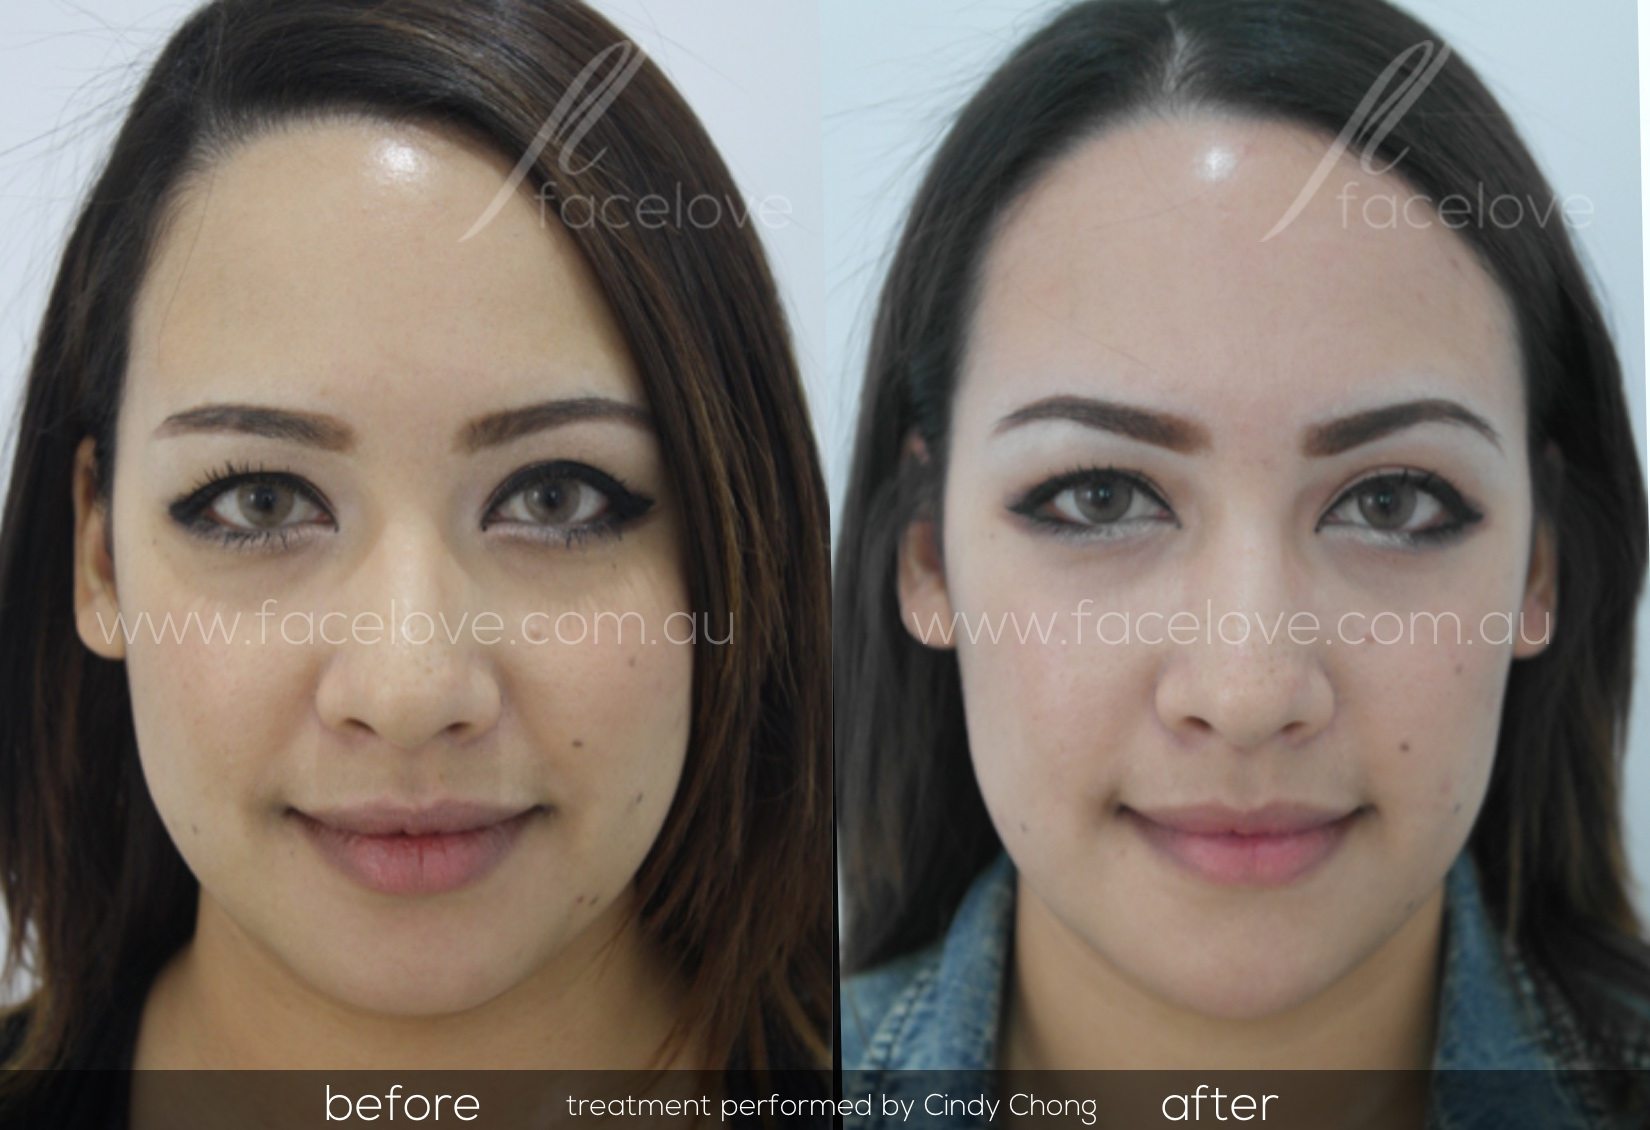 https://facelove.com.au/storage/2015/05/face-slimming-treatment-before-and-after-facelove.jpg